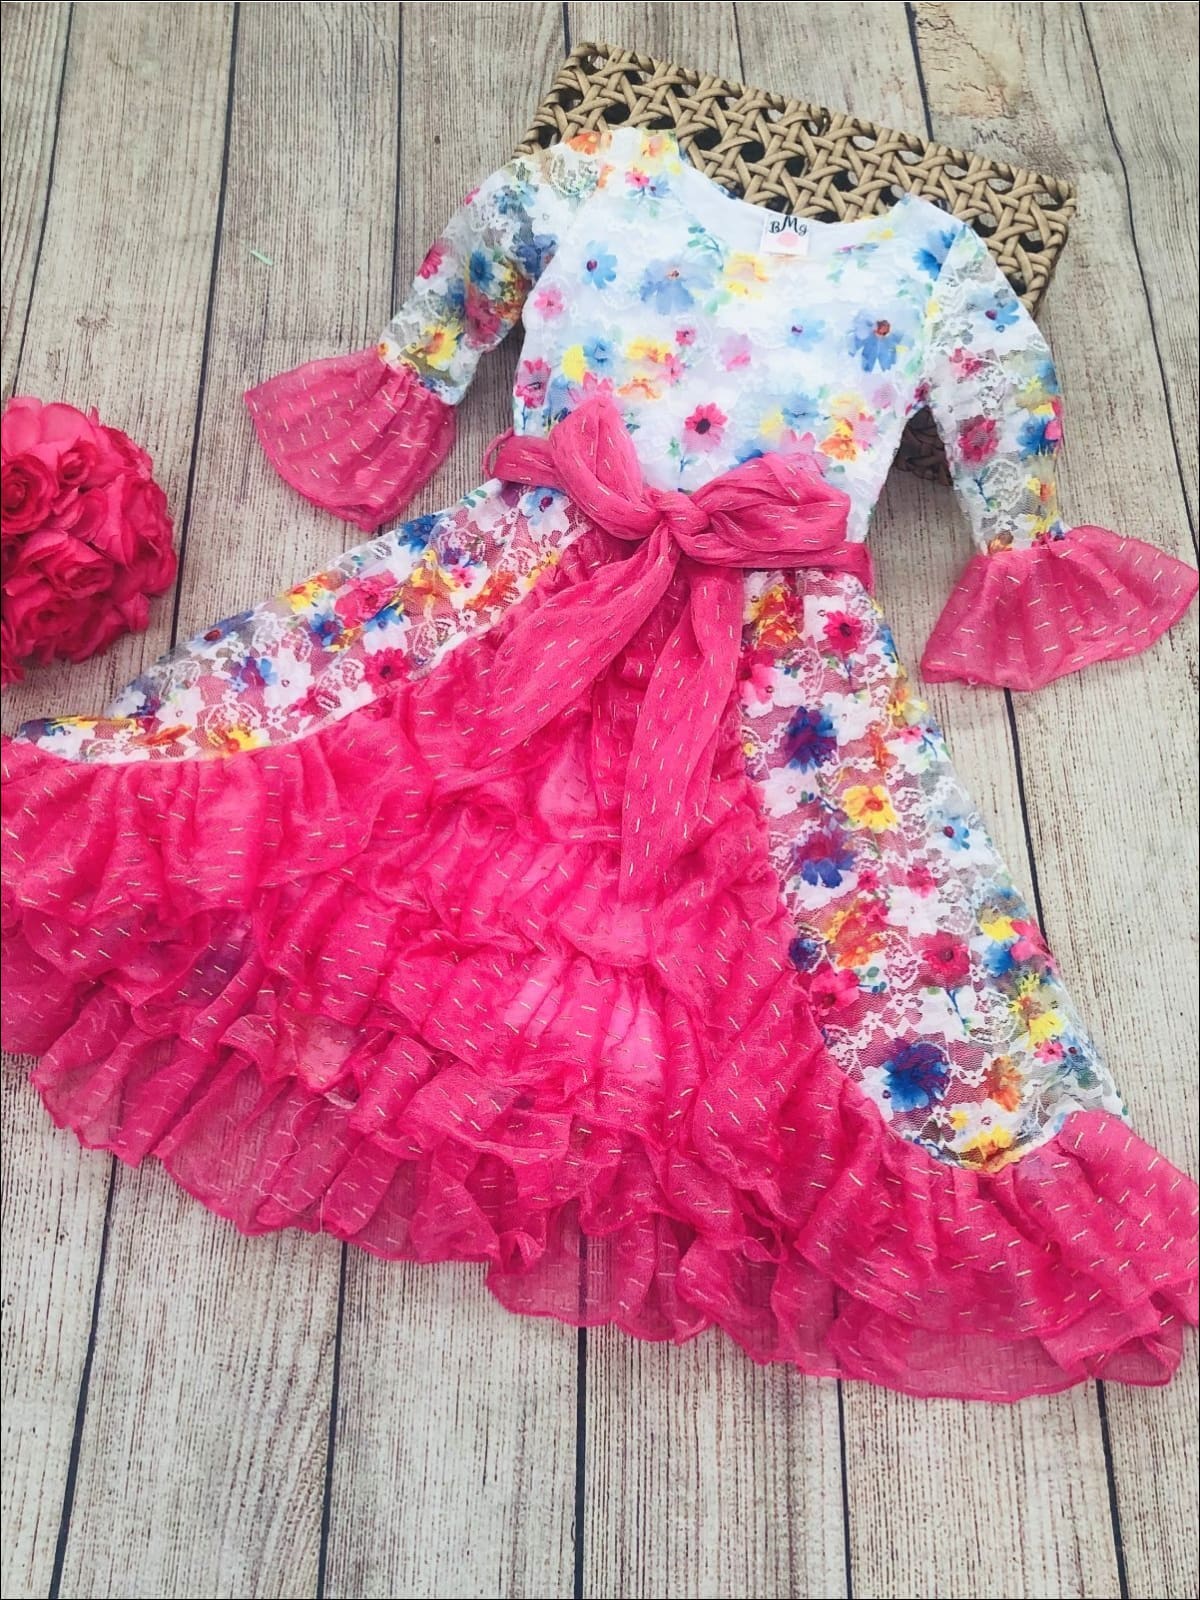 Girls Lace Bell Sleeve Tiered Ruffled Dress with Sash - Girls Spring Dressy Dress